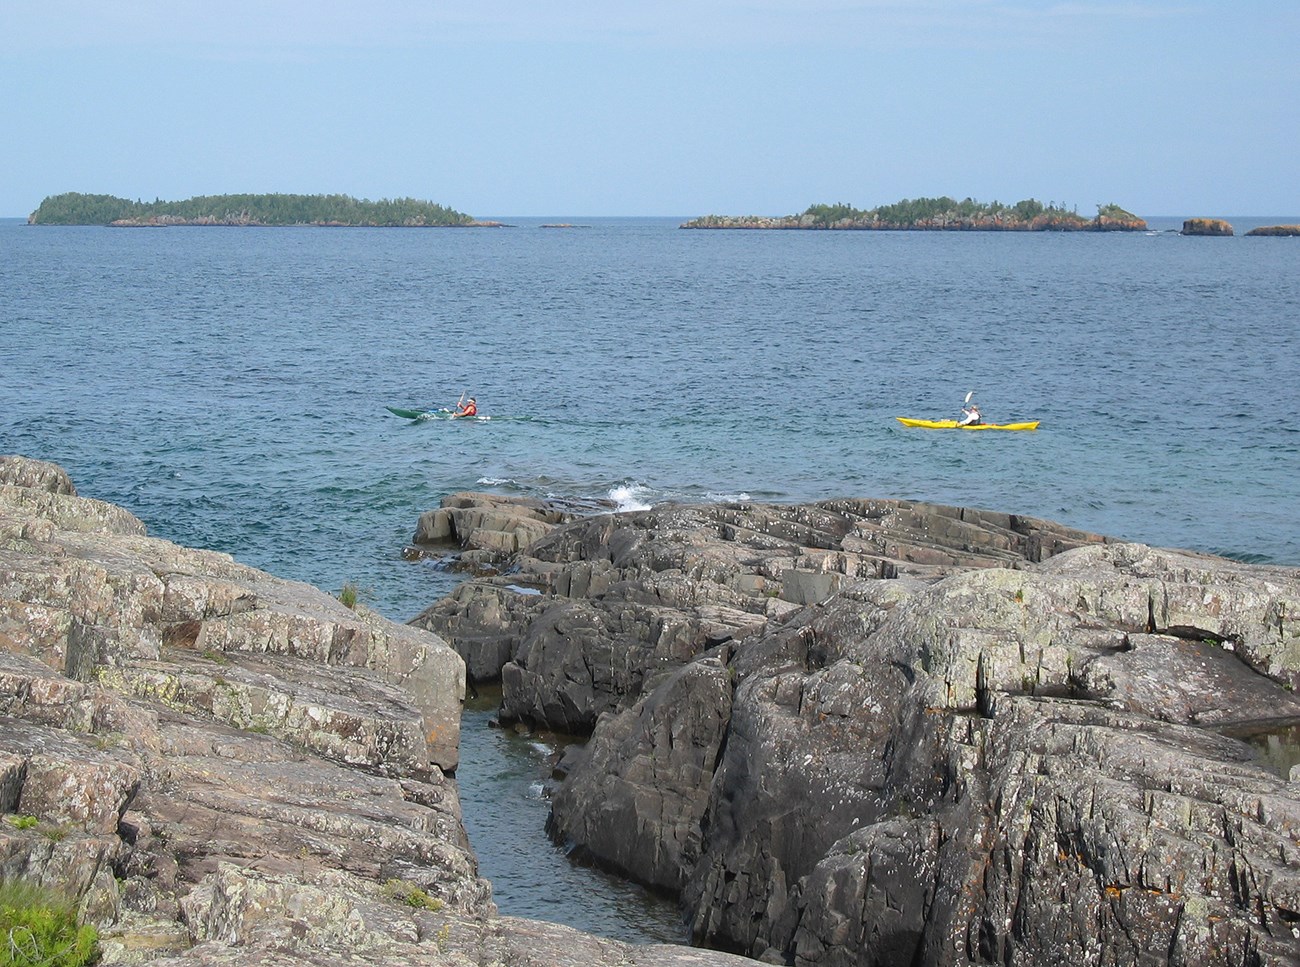 rocky shoreline and open water with 2 kayaks in view